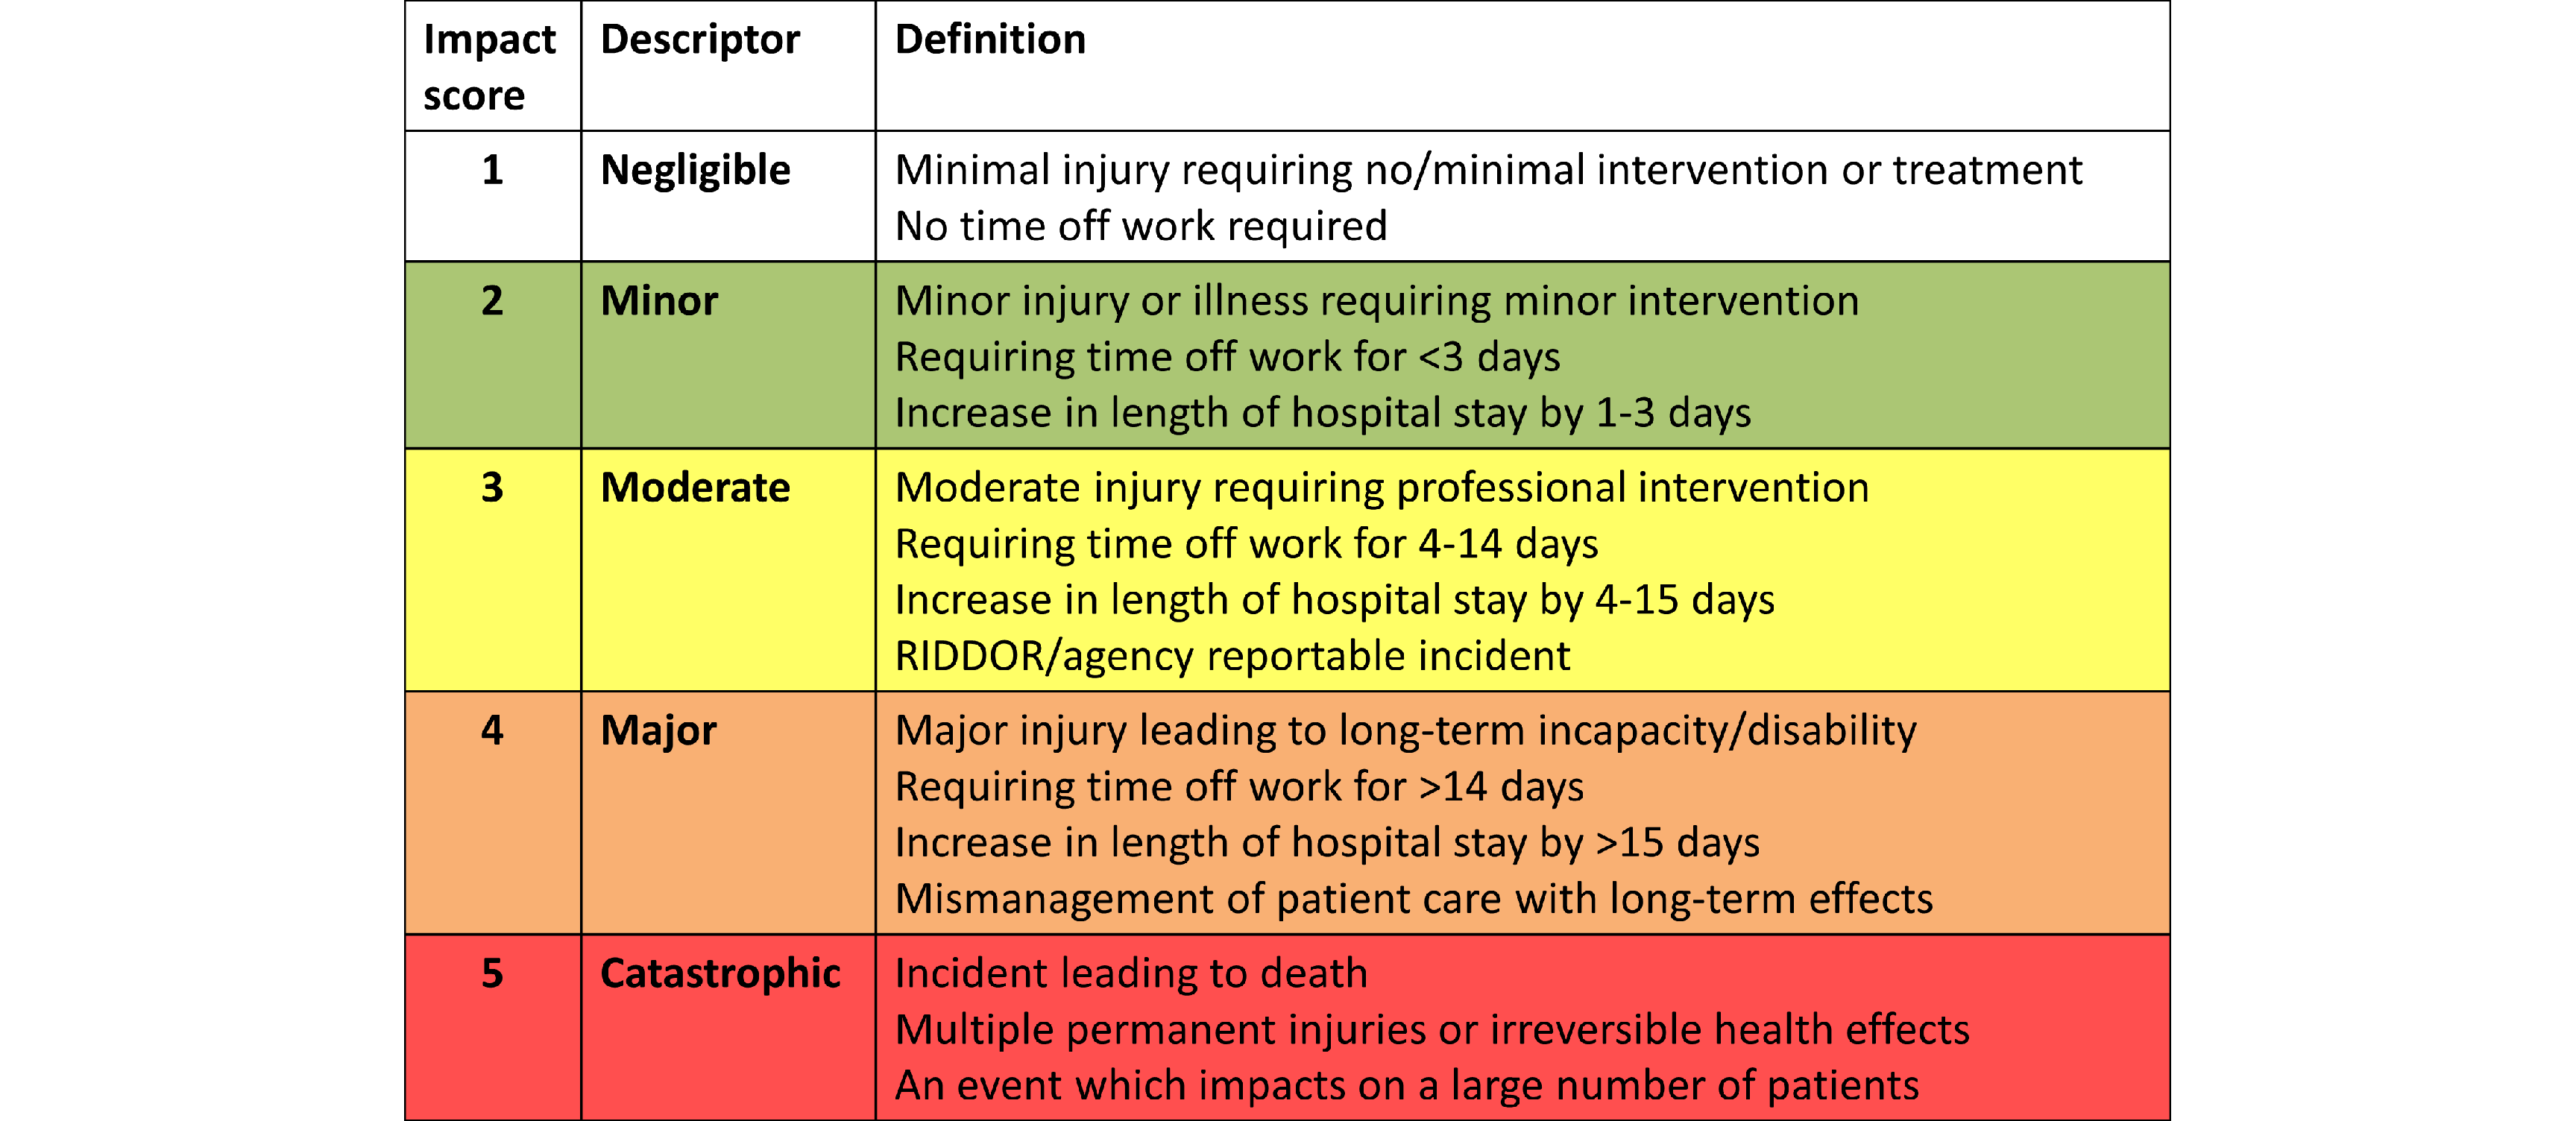 A table of impact score definitions. A score of 1 (Negligible) is defined as: Minimal injury requiring no/minimal intervention or treatment, No time off work required. A score of 2 (Minor) is defined as: Minor injury or illness requiring minor intervention, Requiring time off work for less than 3 days, Increase in length of hospital stay by 1 to 3 days. A score of 3 (Moderate) is defined as: Moderate injury requiring professional intervention, Requiring time off work for 4 to 14 days, Increase in length of hospital stay by 4 to 15 days, RIDDOR/agency reportable incident. A score of 4 (Major) is defined as: Major injury leading to long-term incapacity/disability, Requiring time off work for more than 14 days, Increase in length of hospital stay by more than 15 days, Mismanagement of patient care with long-term effects. A score of 5 (Catastrophic) is defined as: Incident leading to death, Multiple permanent injuries or irreversible health effects, An event which impacts on a large number of patients.